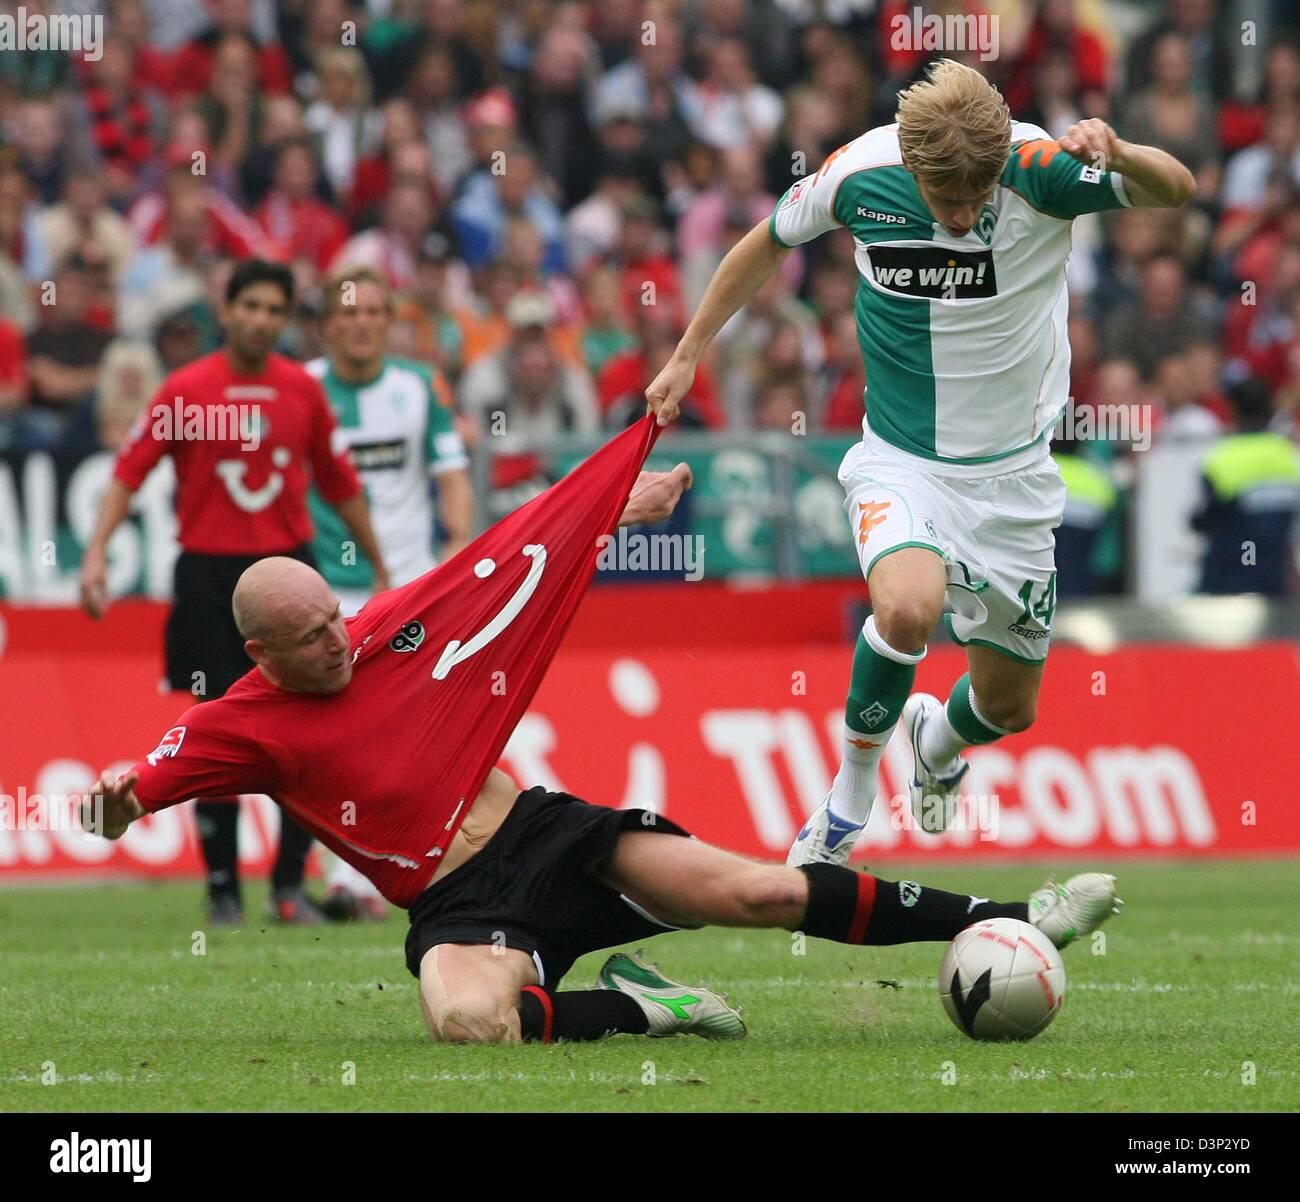 Jiri Stajner of Hannover 96 vies for the ball with Aaron Hunt (R) of Werder  Bremen during the Bundesliga match at AWD-Arena in Hanover, Germany, Sunday  13 August 2006. Werder Bremen won